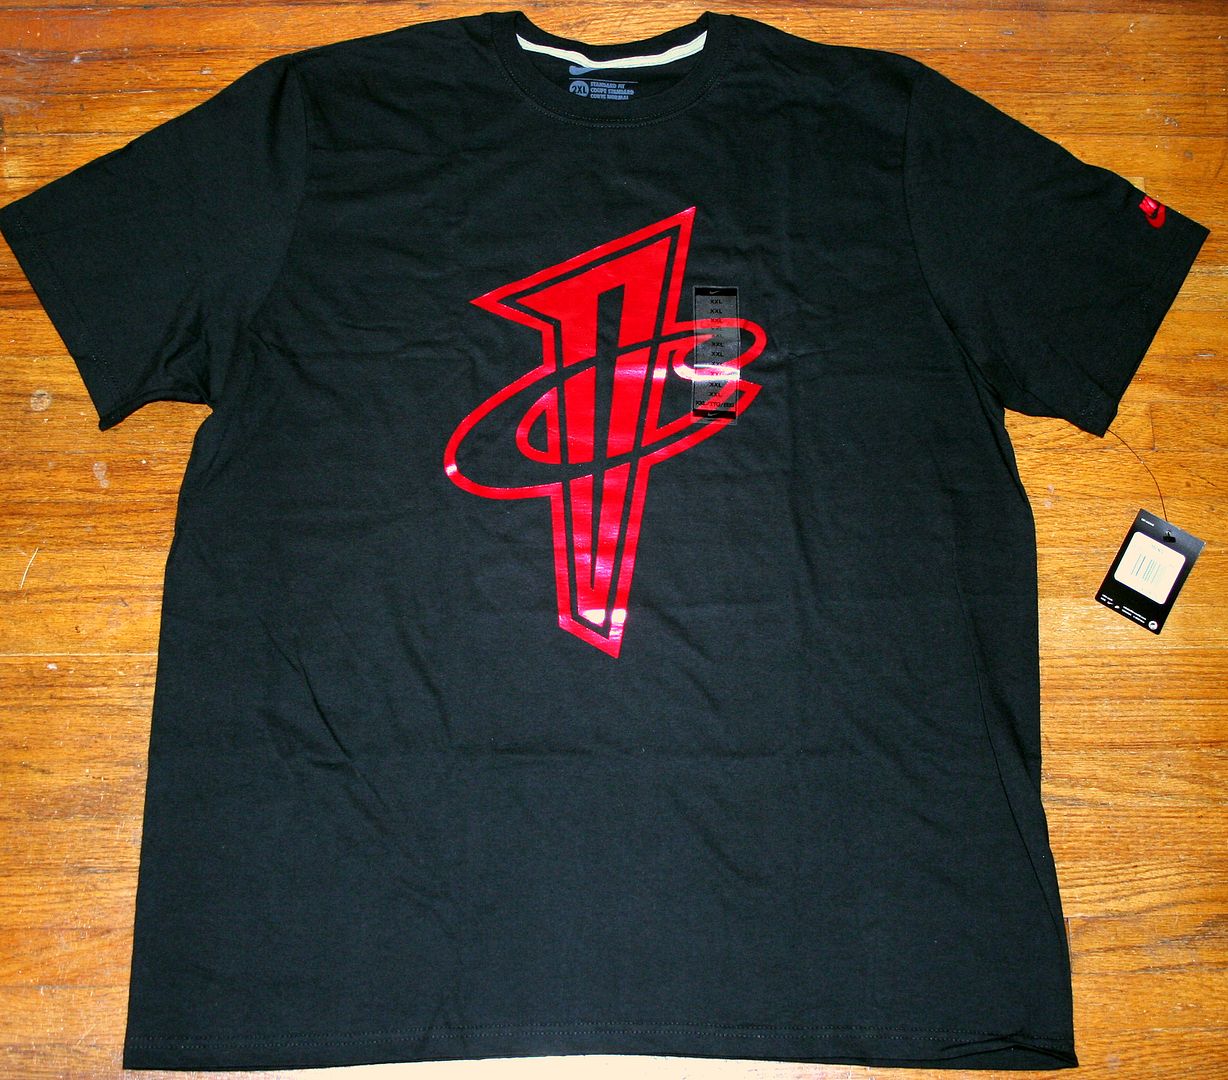 shirt guaranteed 100 % authentic always selling new nike shoes and 